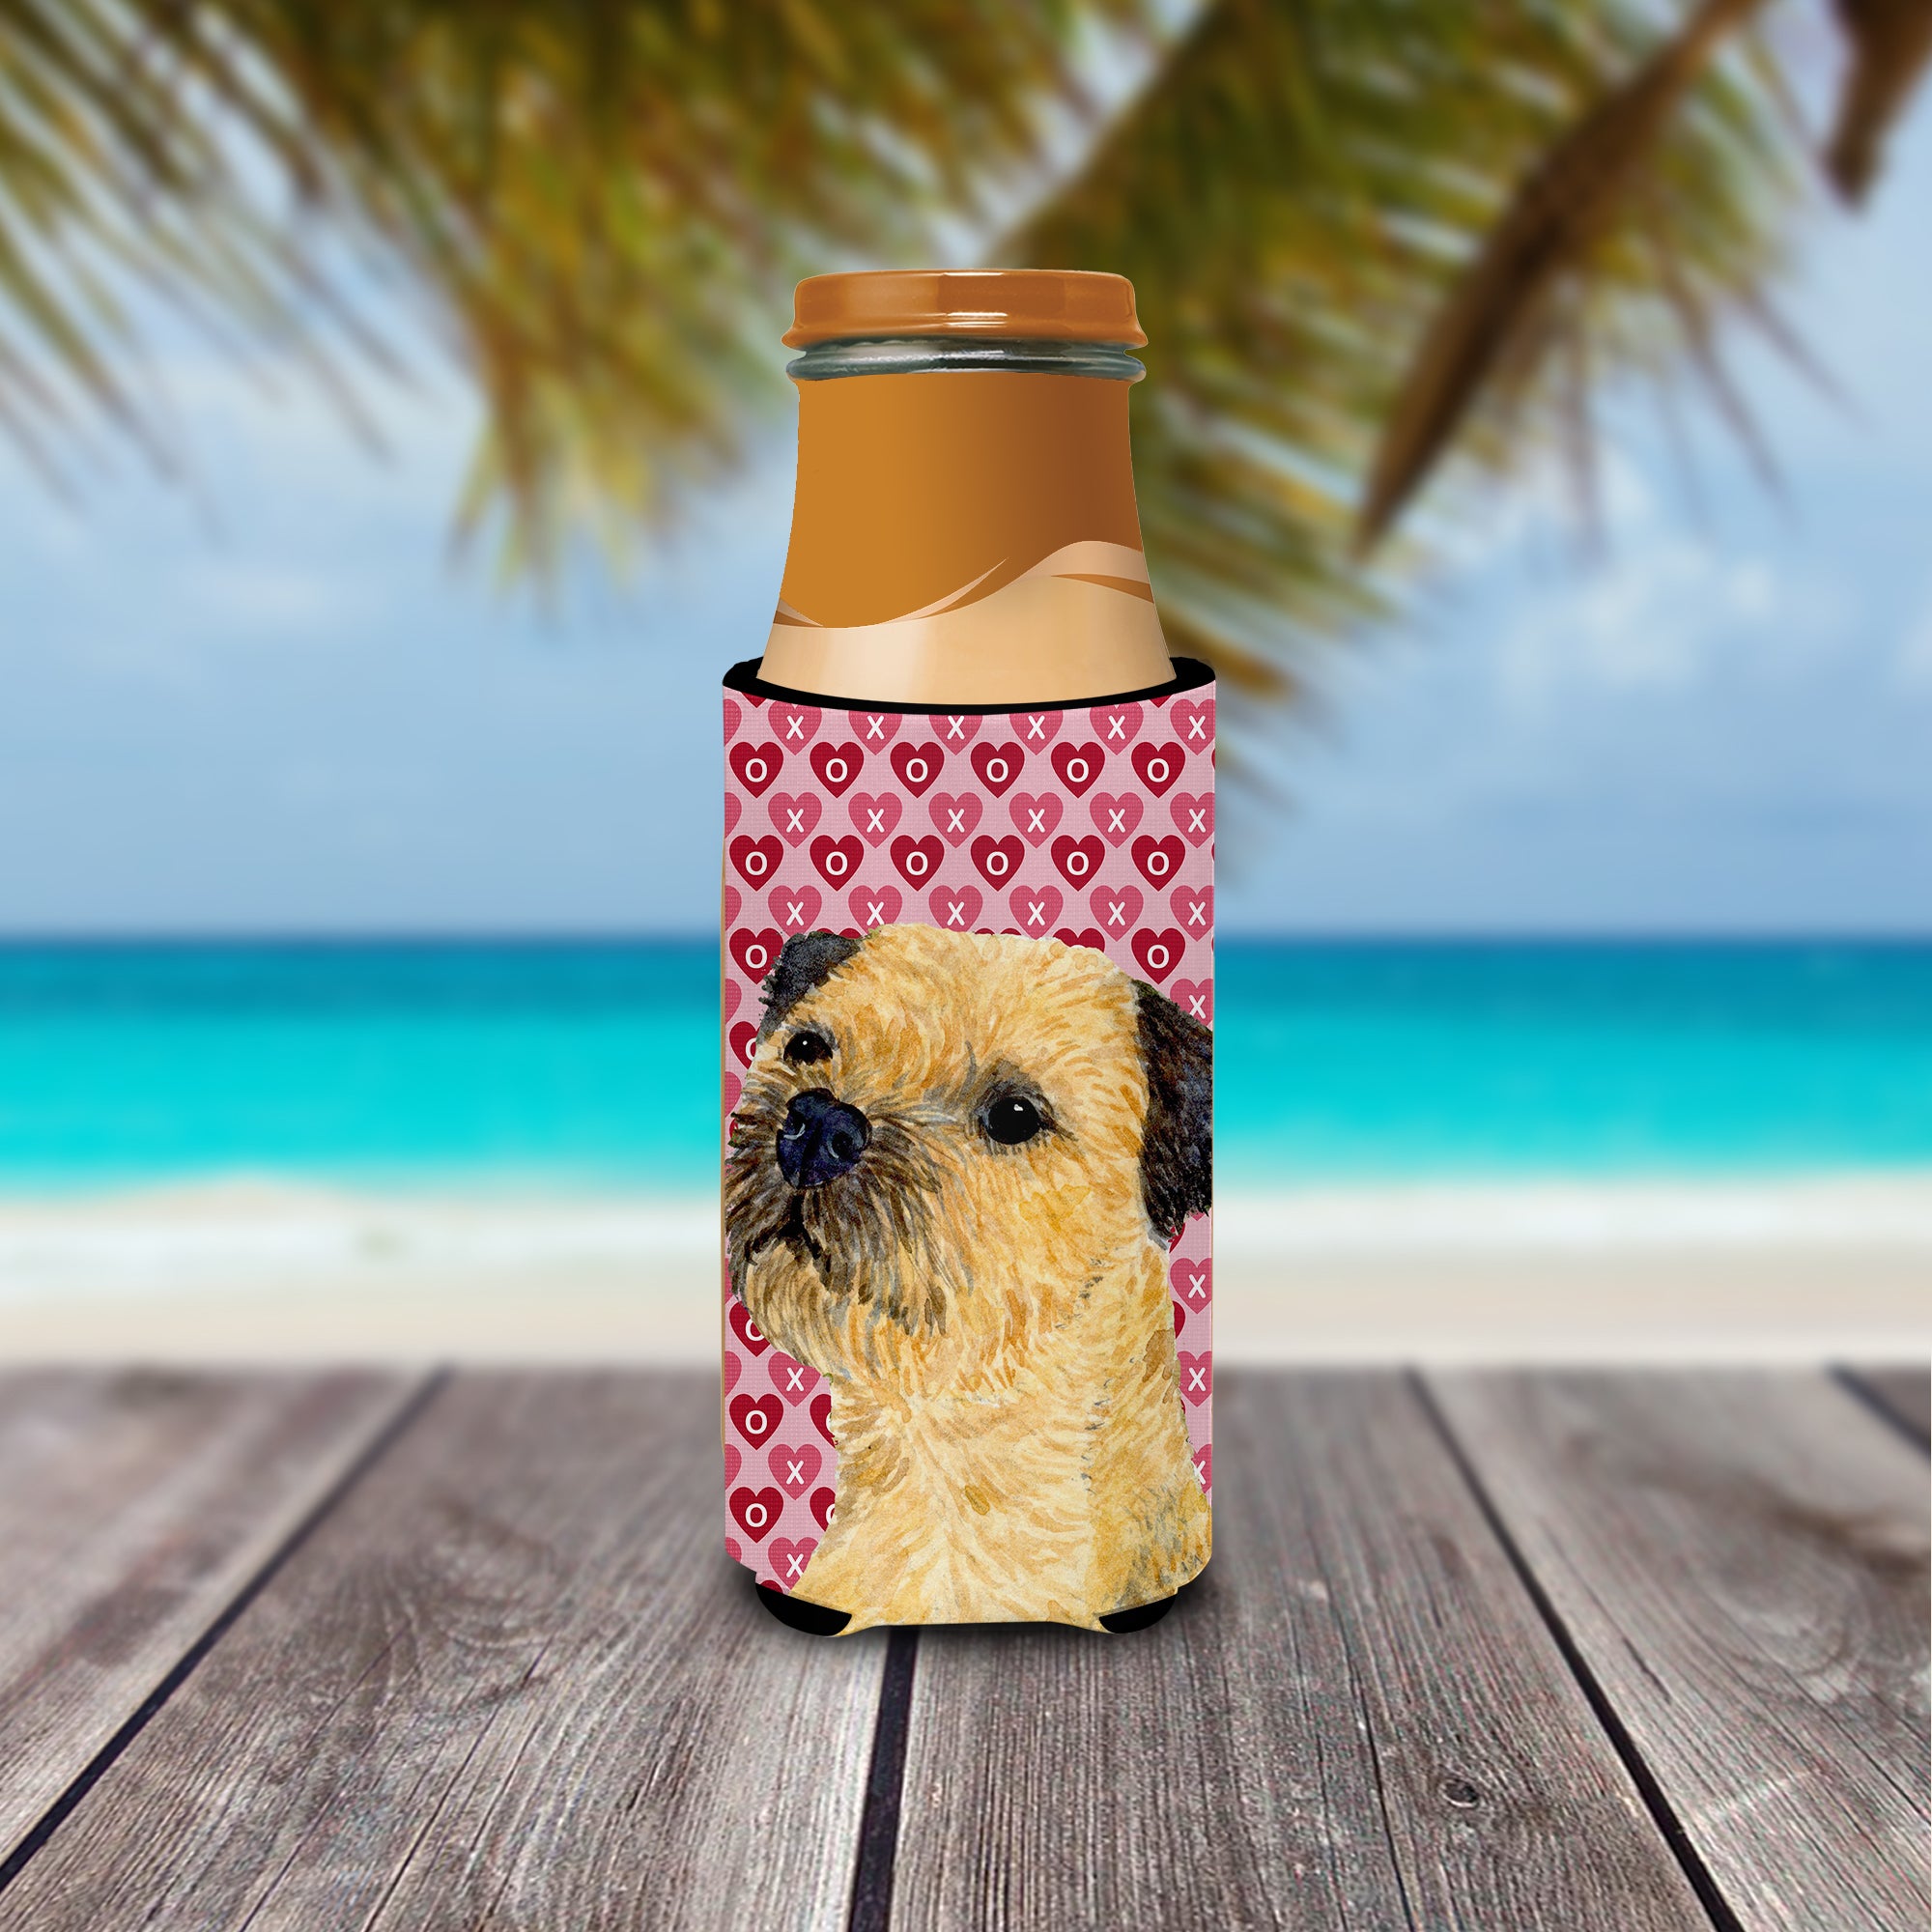 Border Terrier Hearts Love and Valentine's Day Portrait Ultra Beverage Insulators for slim cans LH9143MUK.